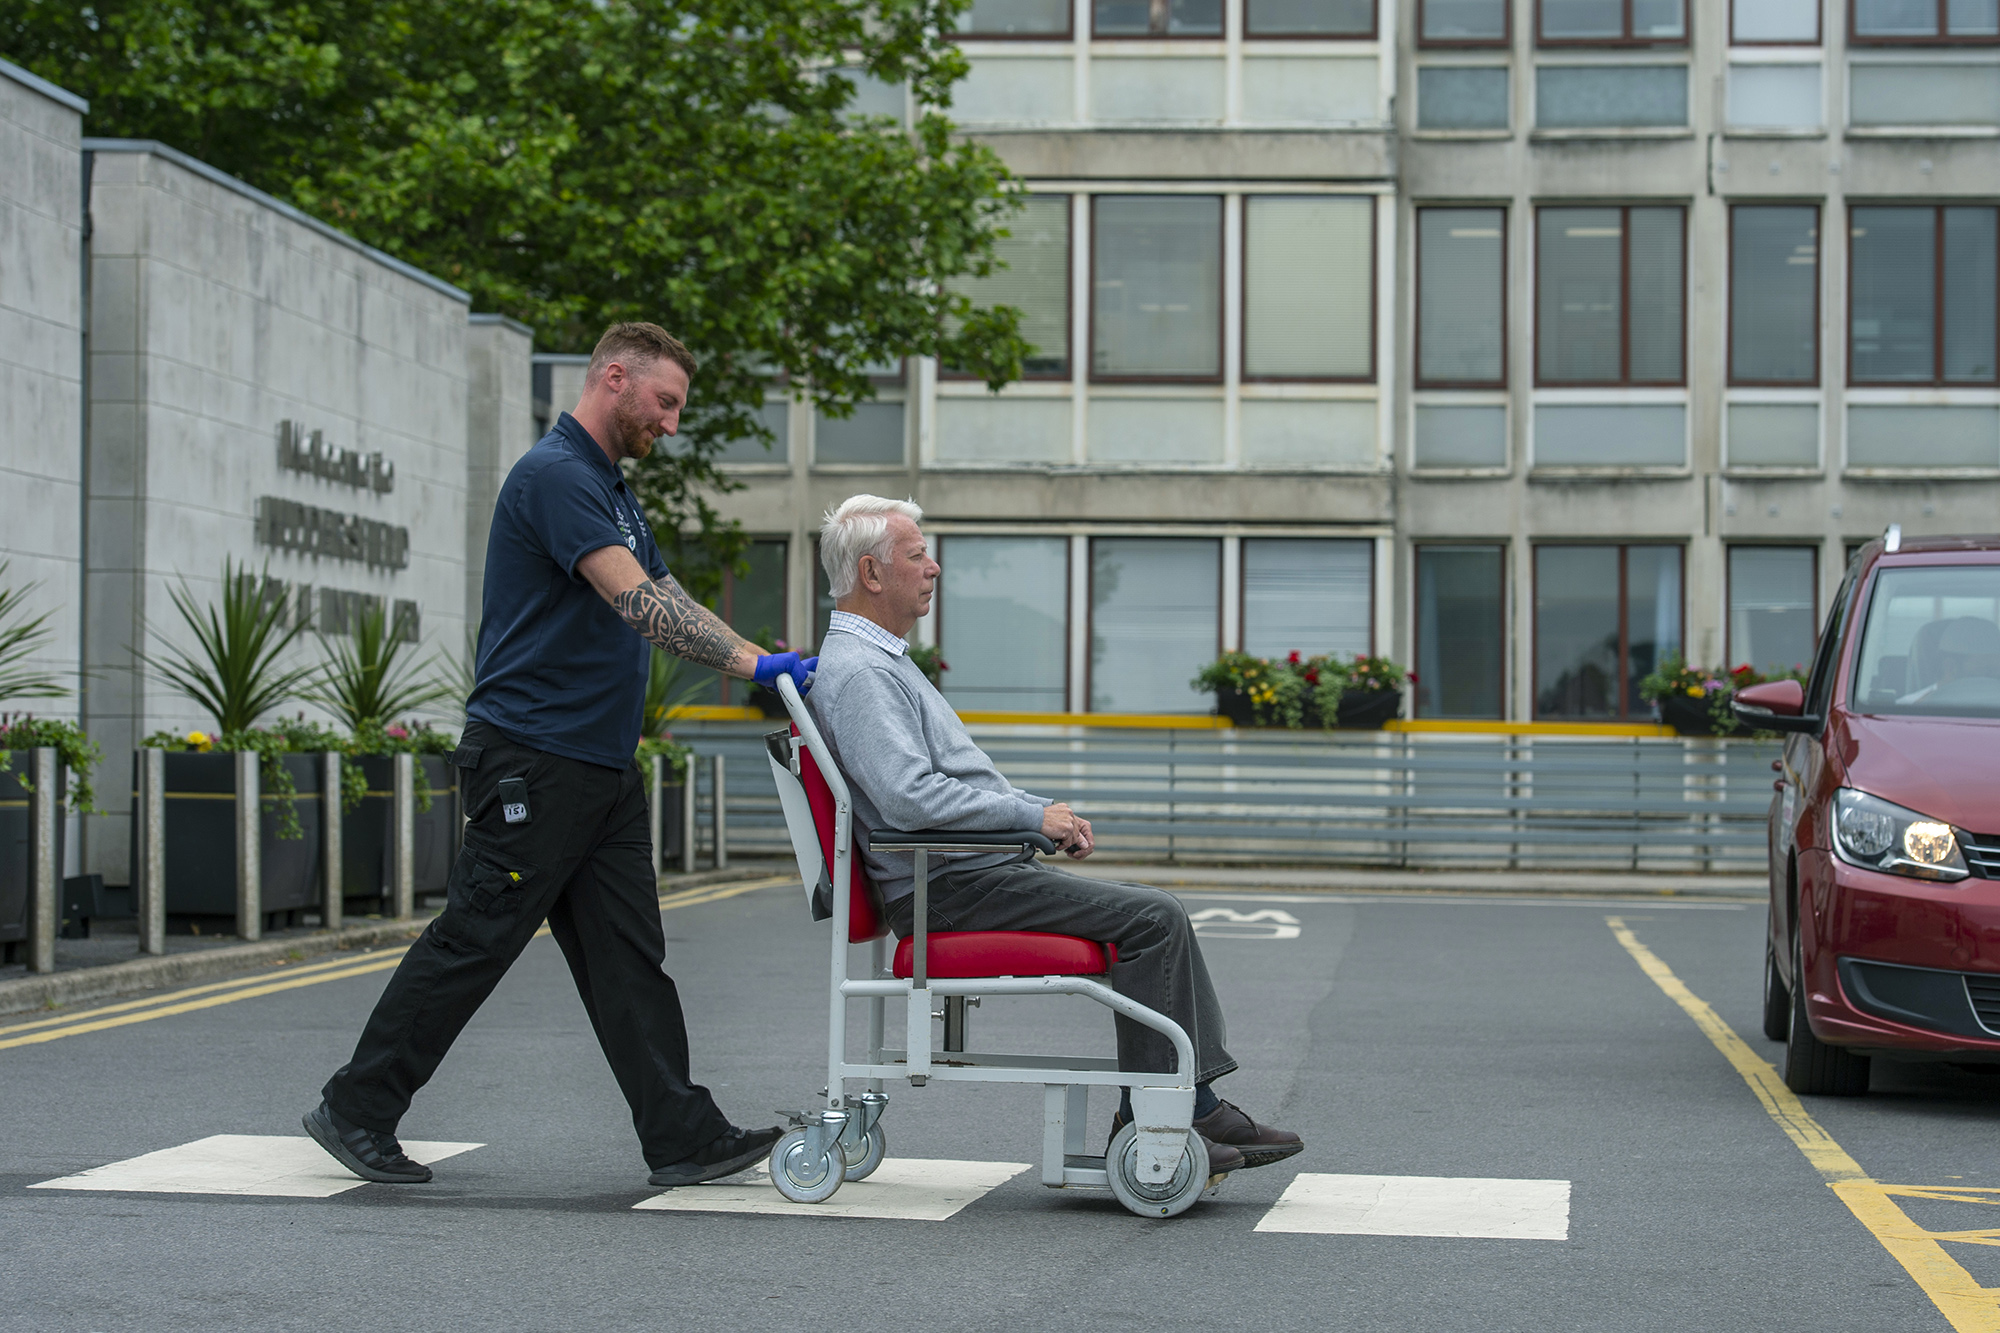 Elderly man in a wheelchair being pushed by a member of staff.